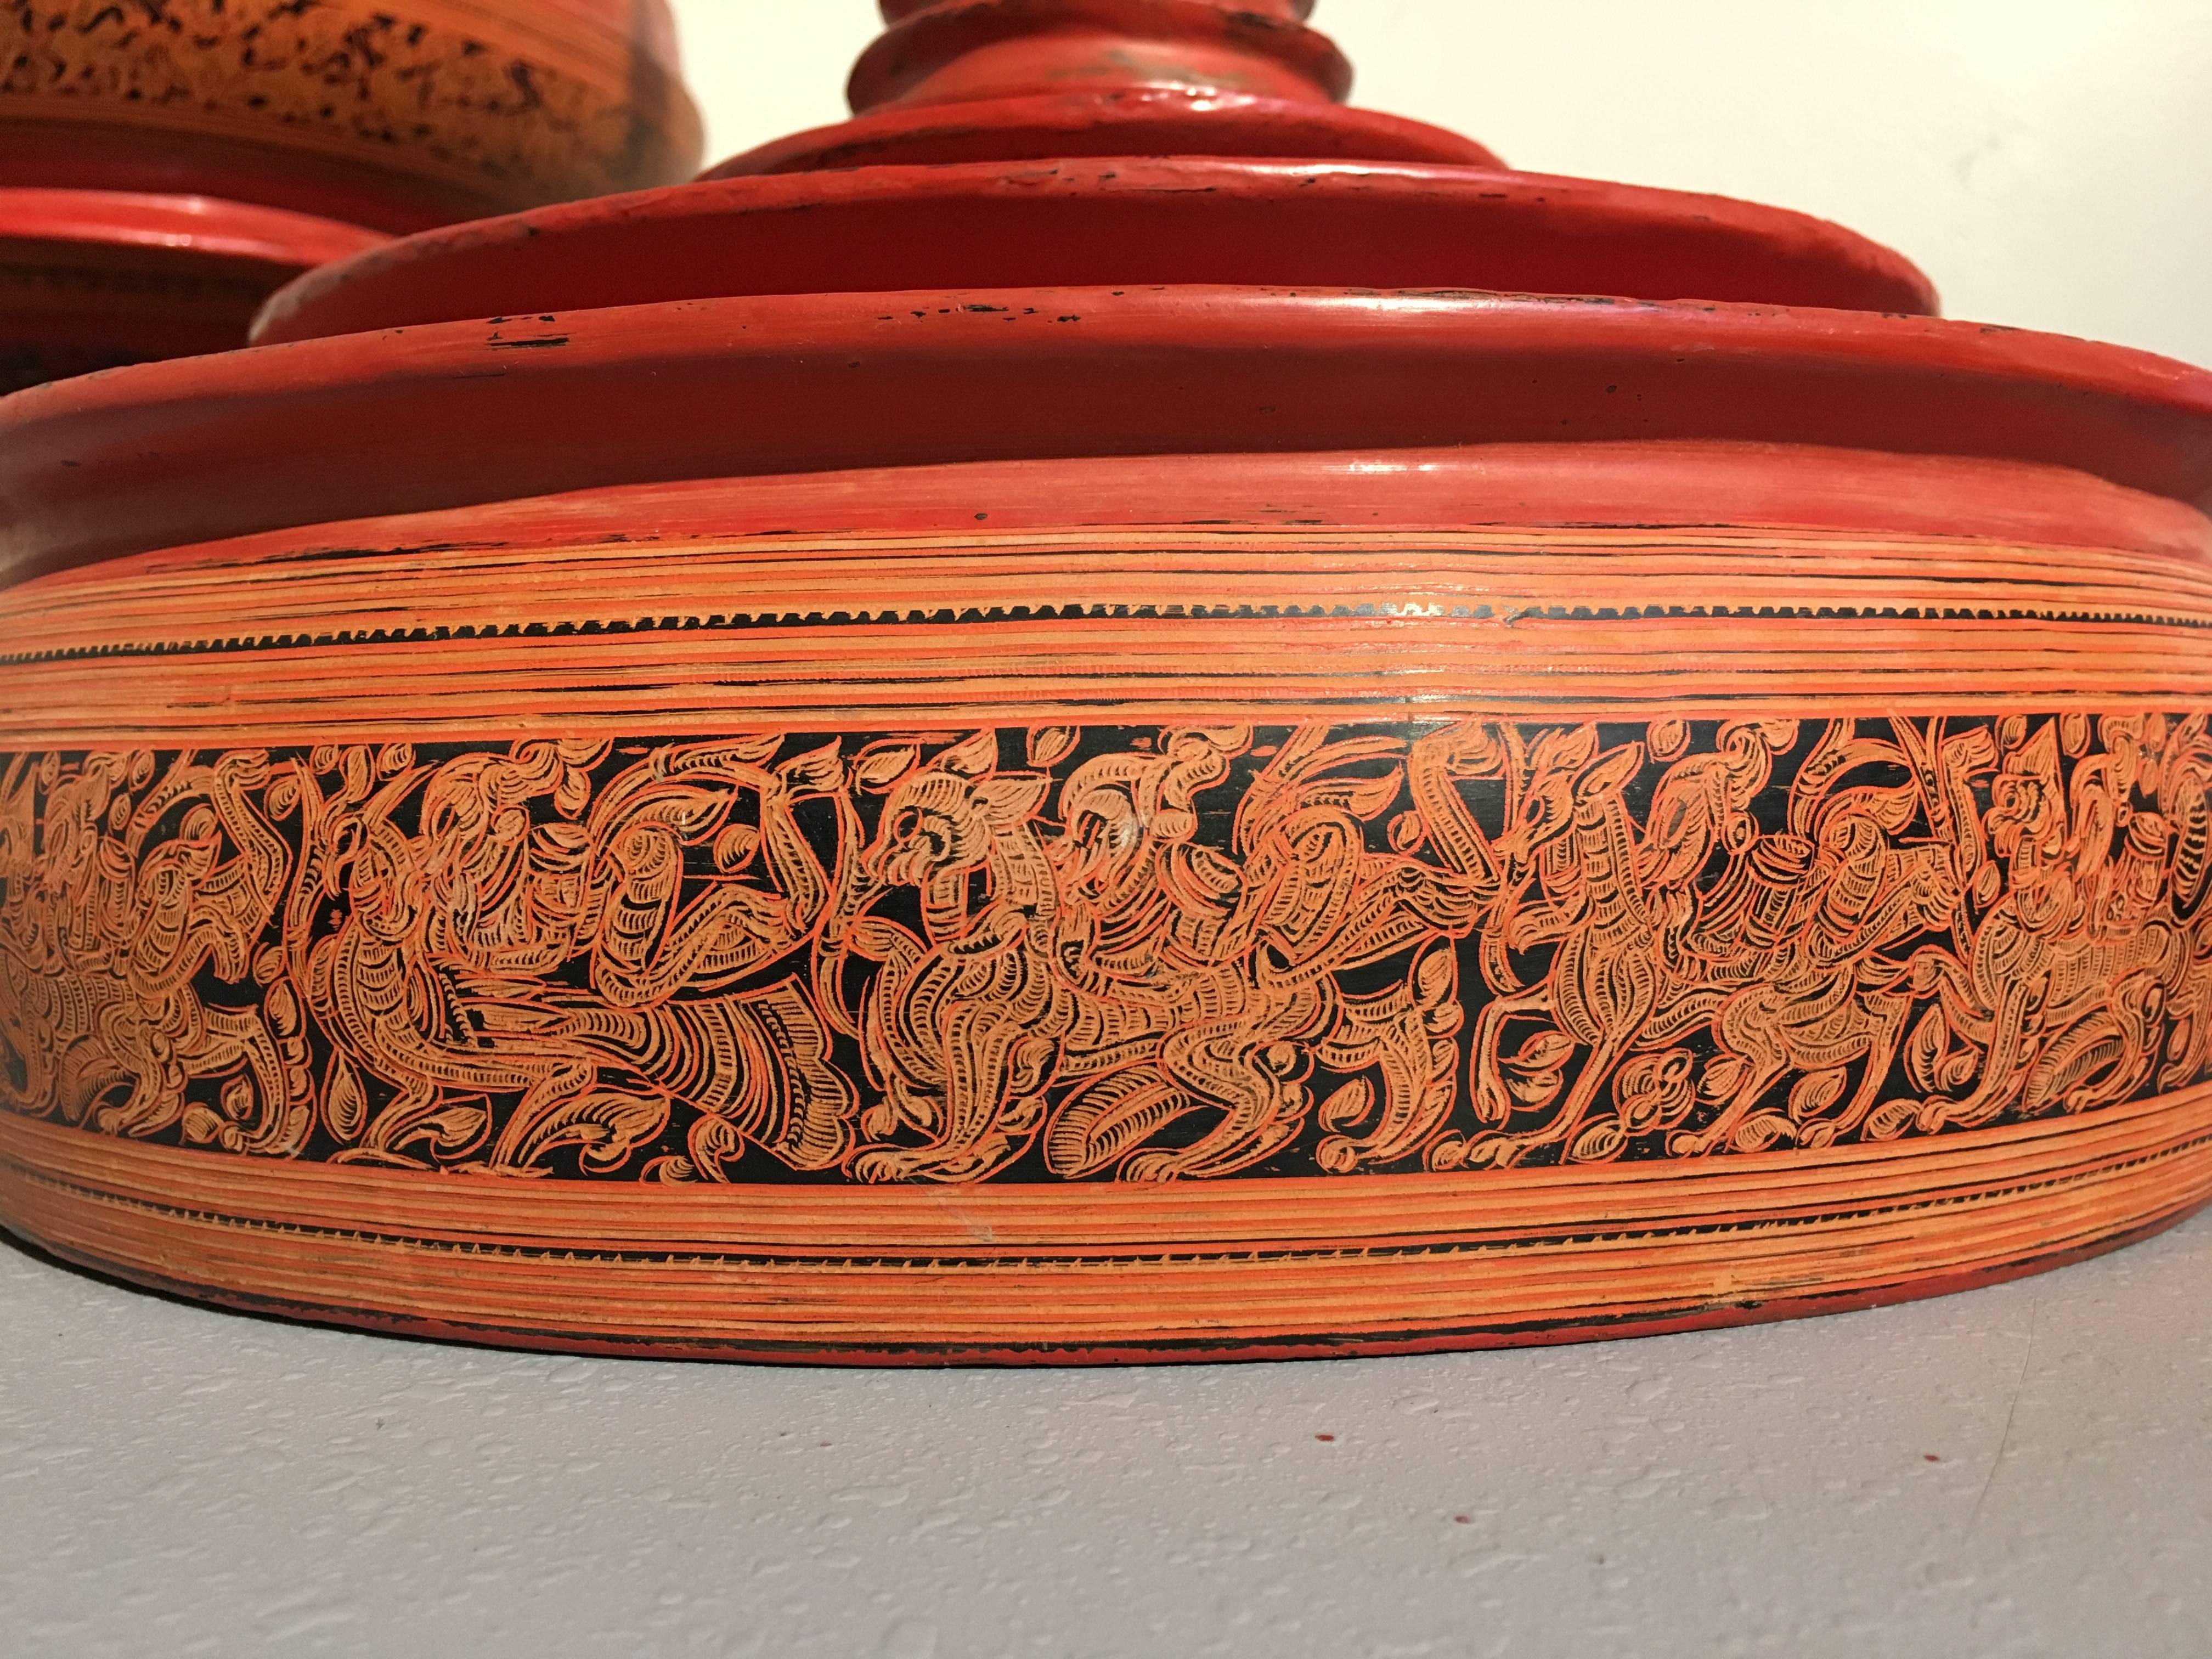 Rattan 19th Century Burmese Red Lacquer Painted Hsun-Ok